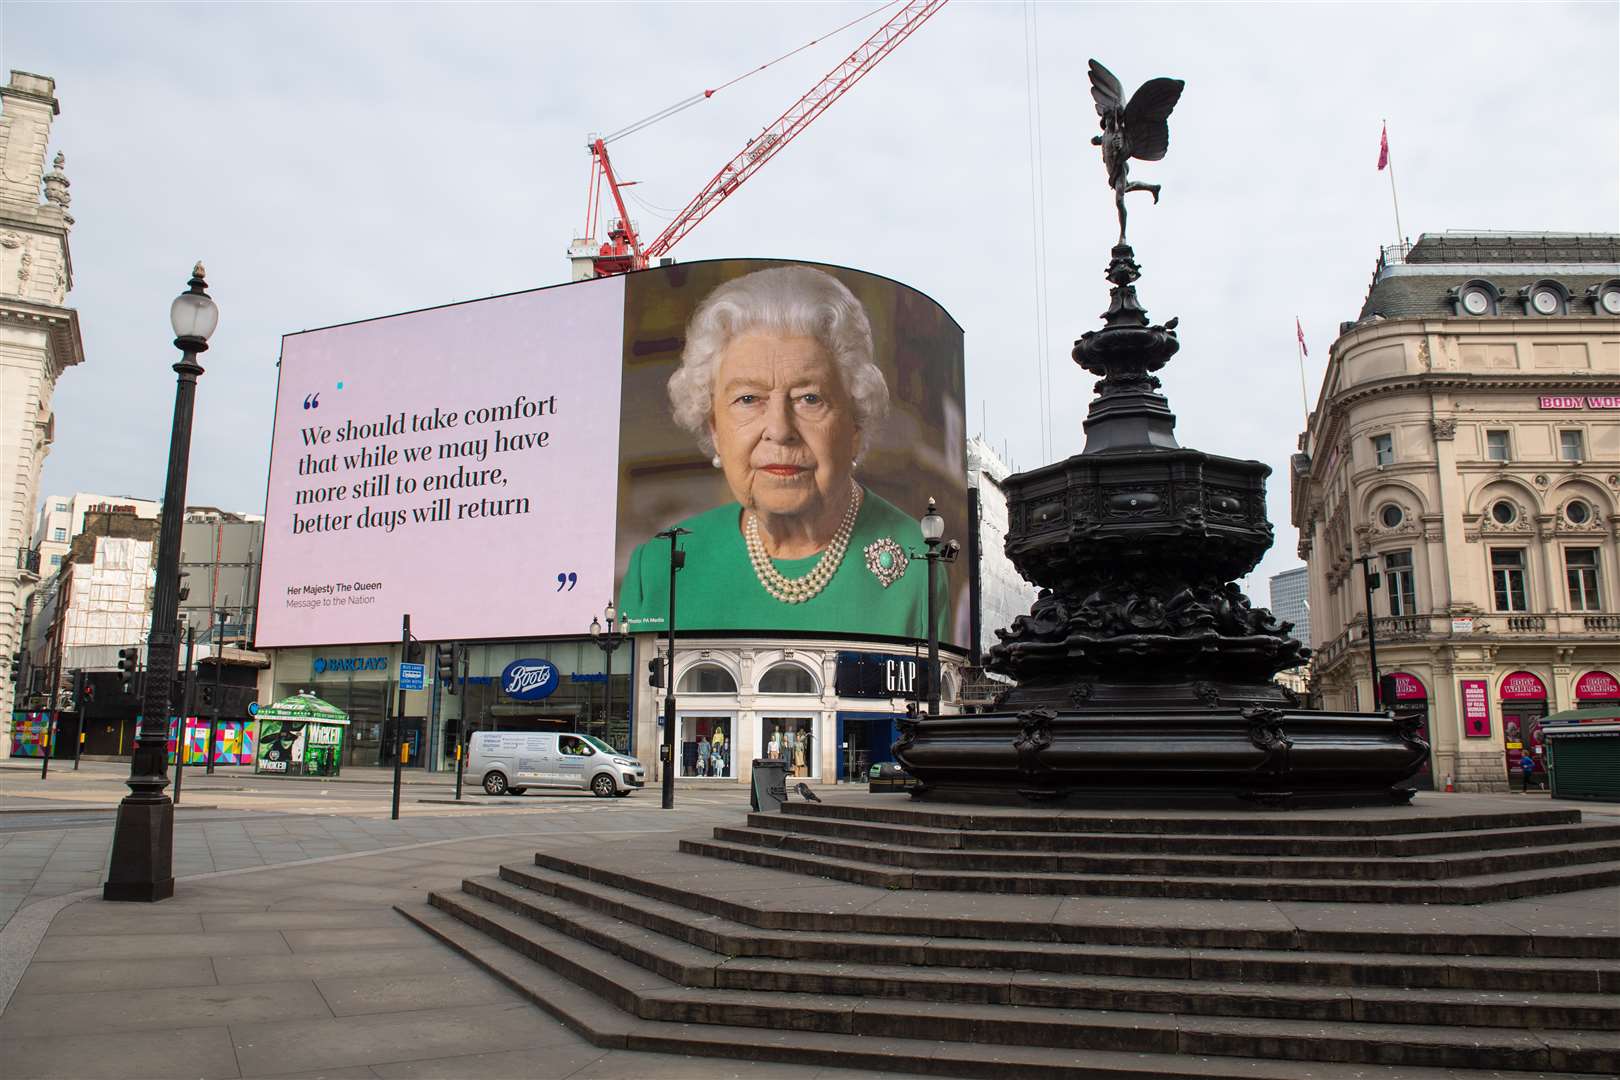 Quiet streets as the Queen’s image goes up in lights at Piccadilly Circus (Dominic Lipinski/PA)